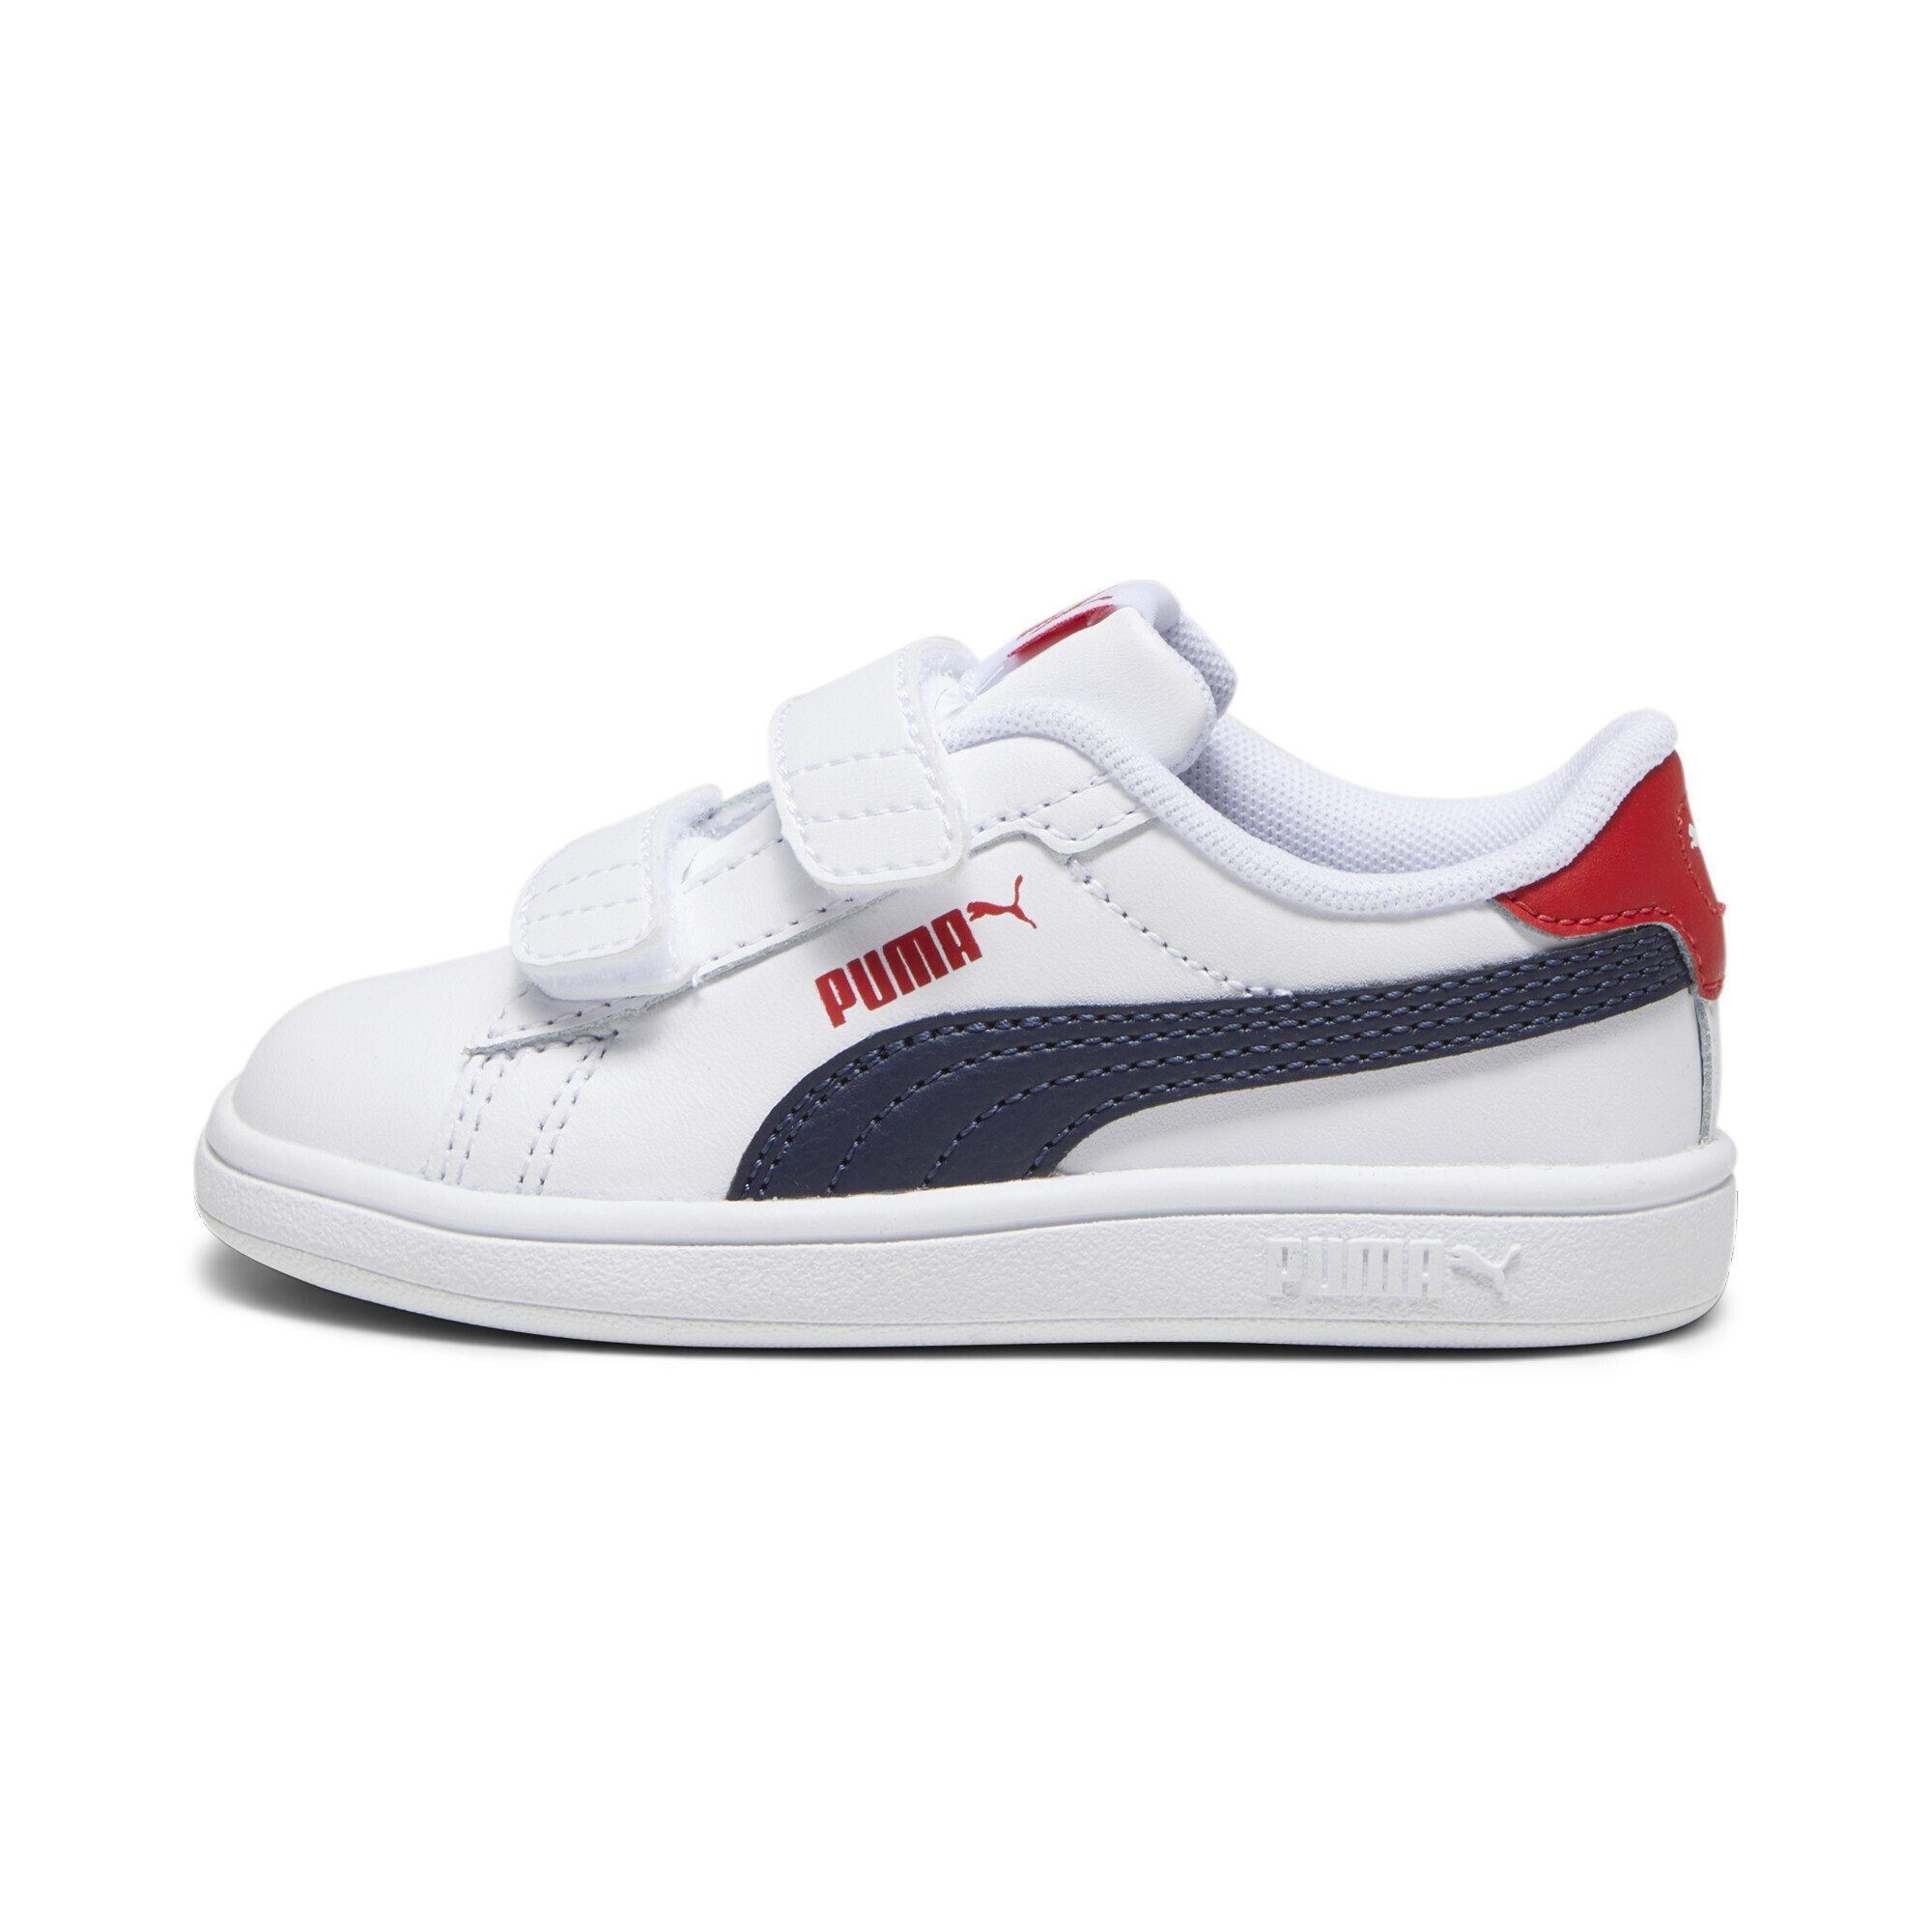 Sneakers V Smash Time Blue White 3.0 Red Sneaker PUMA Leather Kinder All For Navy